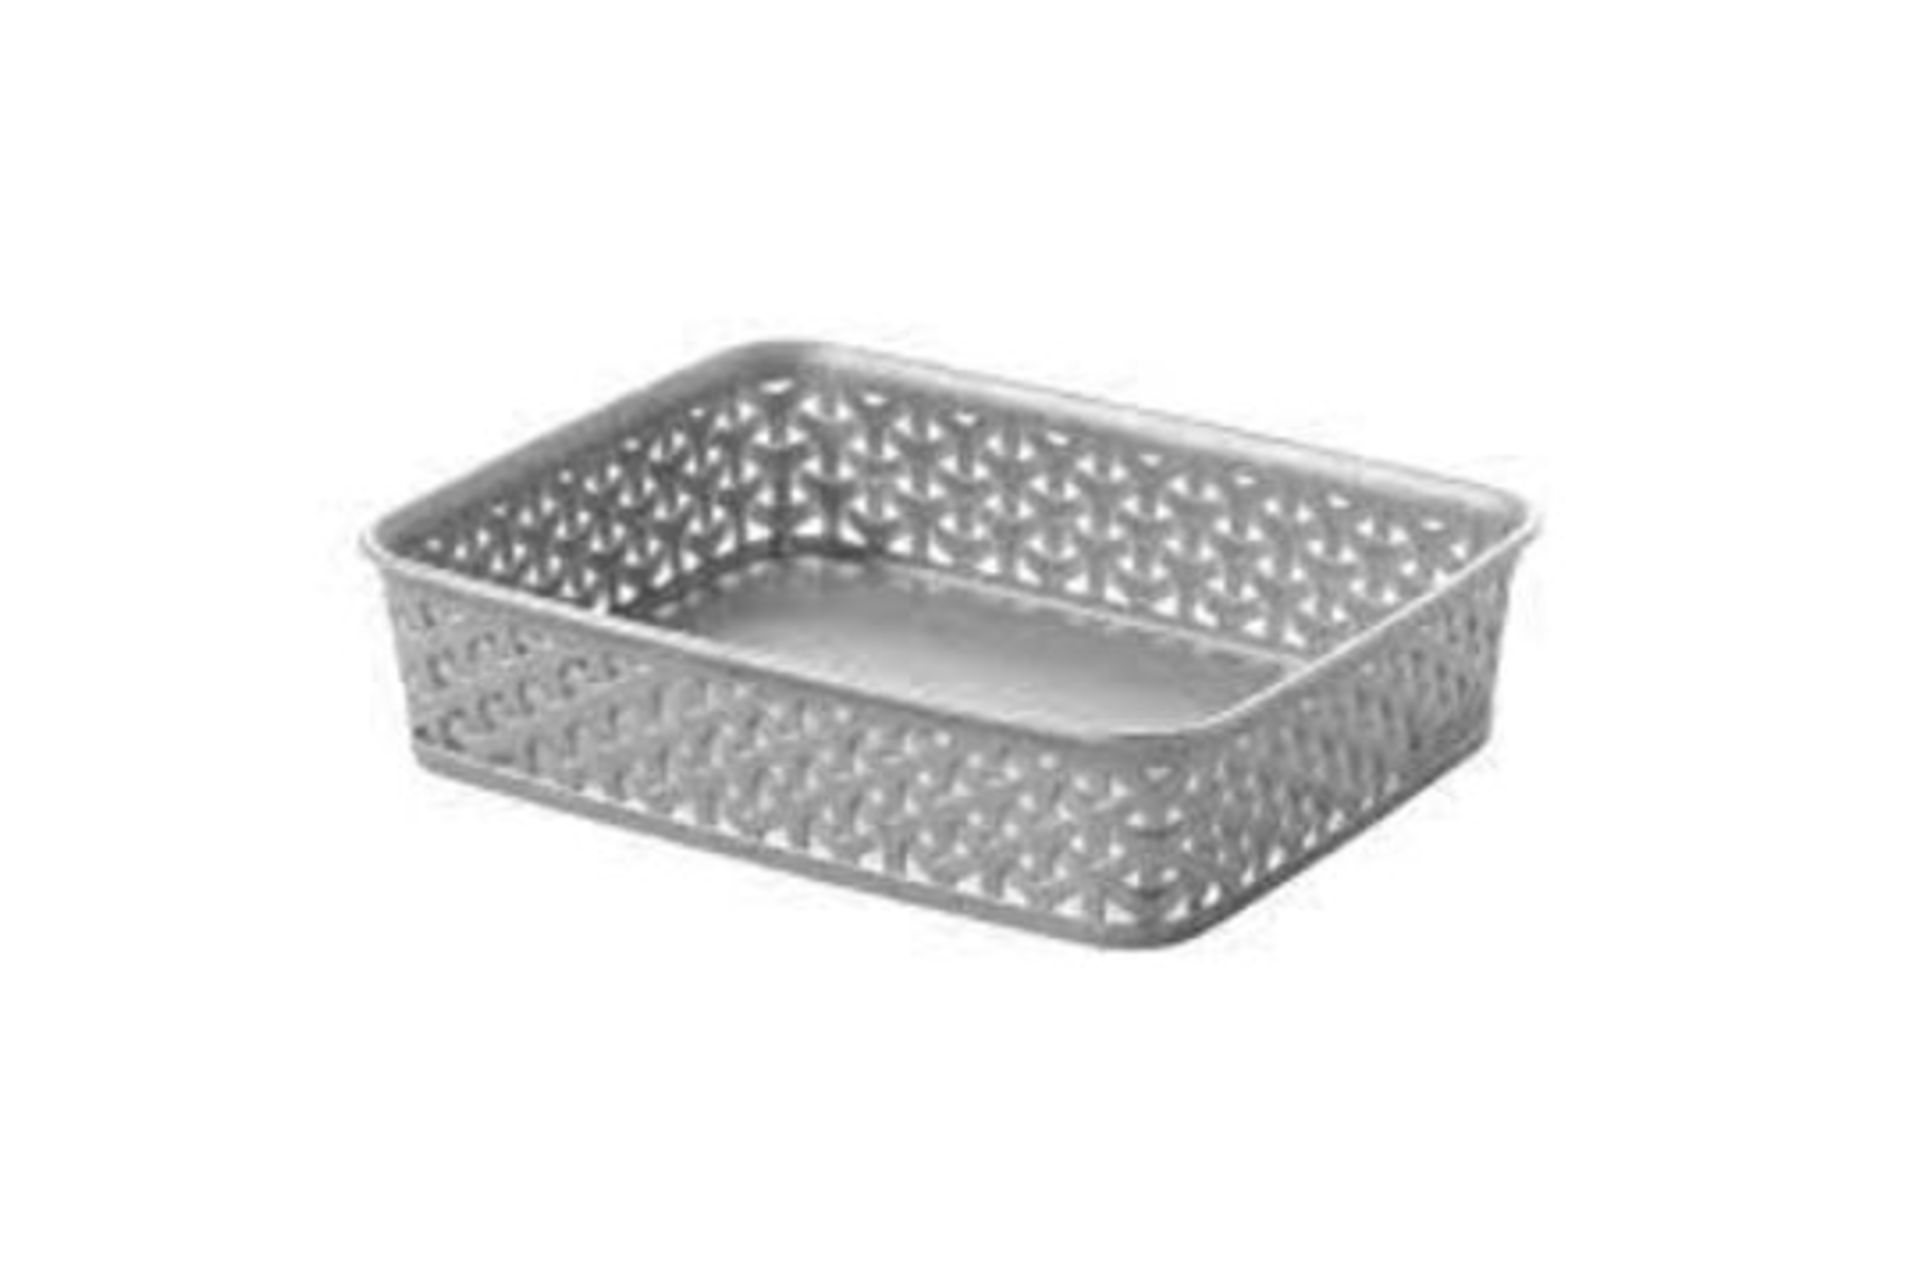 60 X NEW CURVER MY STYLE A5 TRAY GREY (246033). My Style is a wide range of multifunctional products